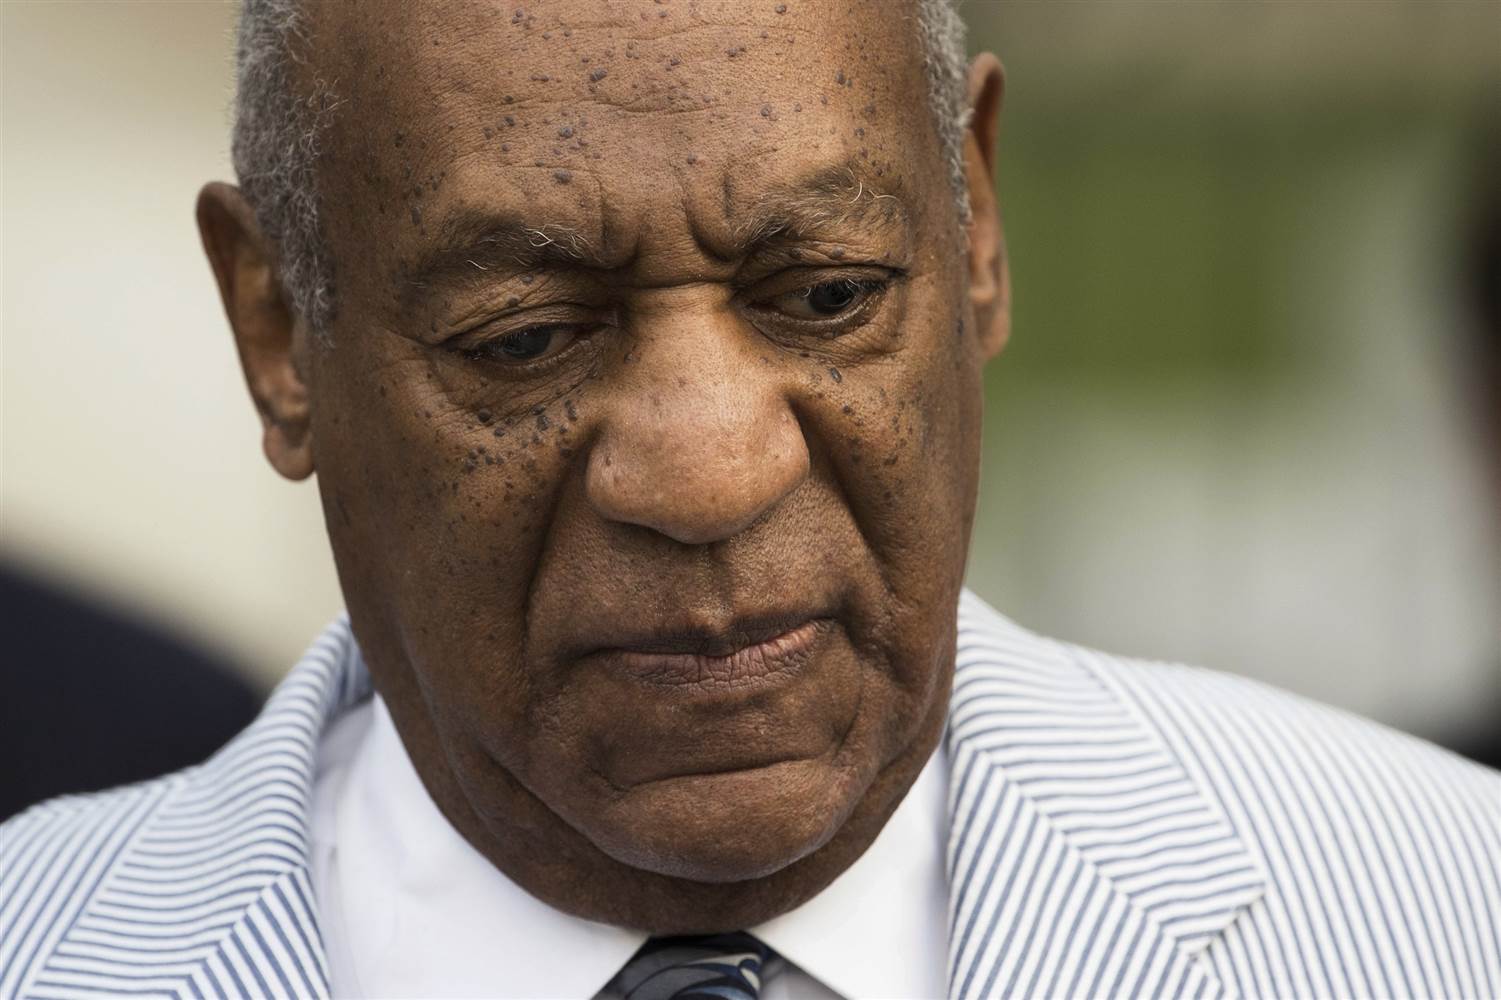 Bill Cosby arrives for a pretrial hearing in his sexual assault case at the Montgomery County Courthouse in Norristown, Pa., Tuesday, Sept. 6, 2016. Matt Rourke / AP